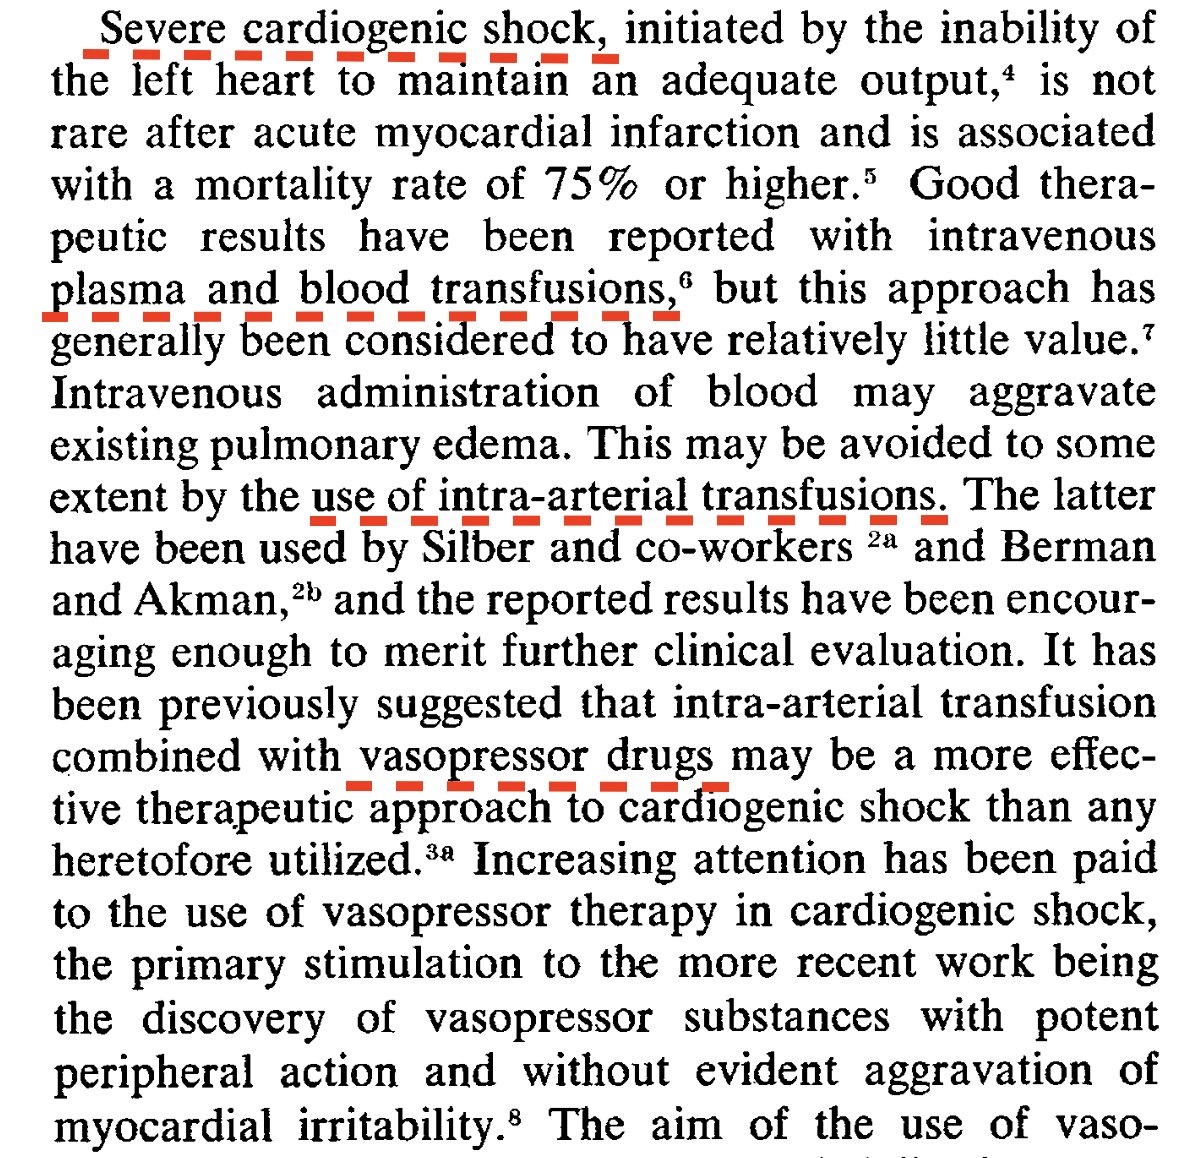 ICU Hemodynamics Secrets:

I find it fascinating to study old articles (this was published 70 years ago in JAMA) and learn about how we treated common life-threatening disorders in the past.

This was the management of #cardiogenicshock in the 50s: